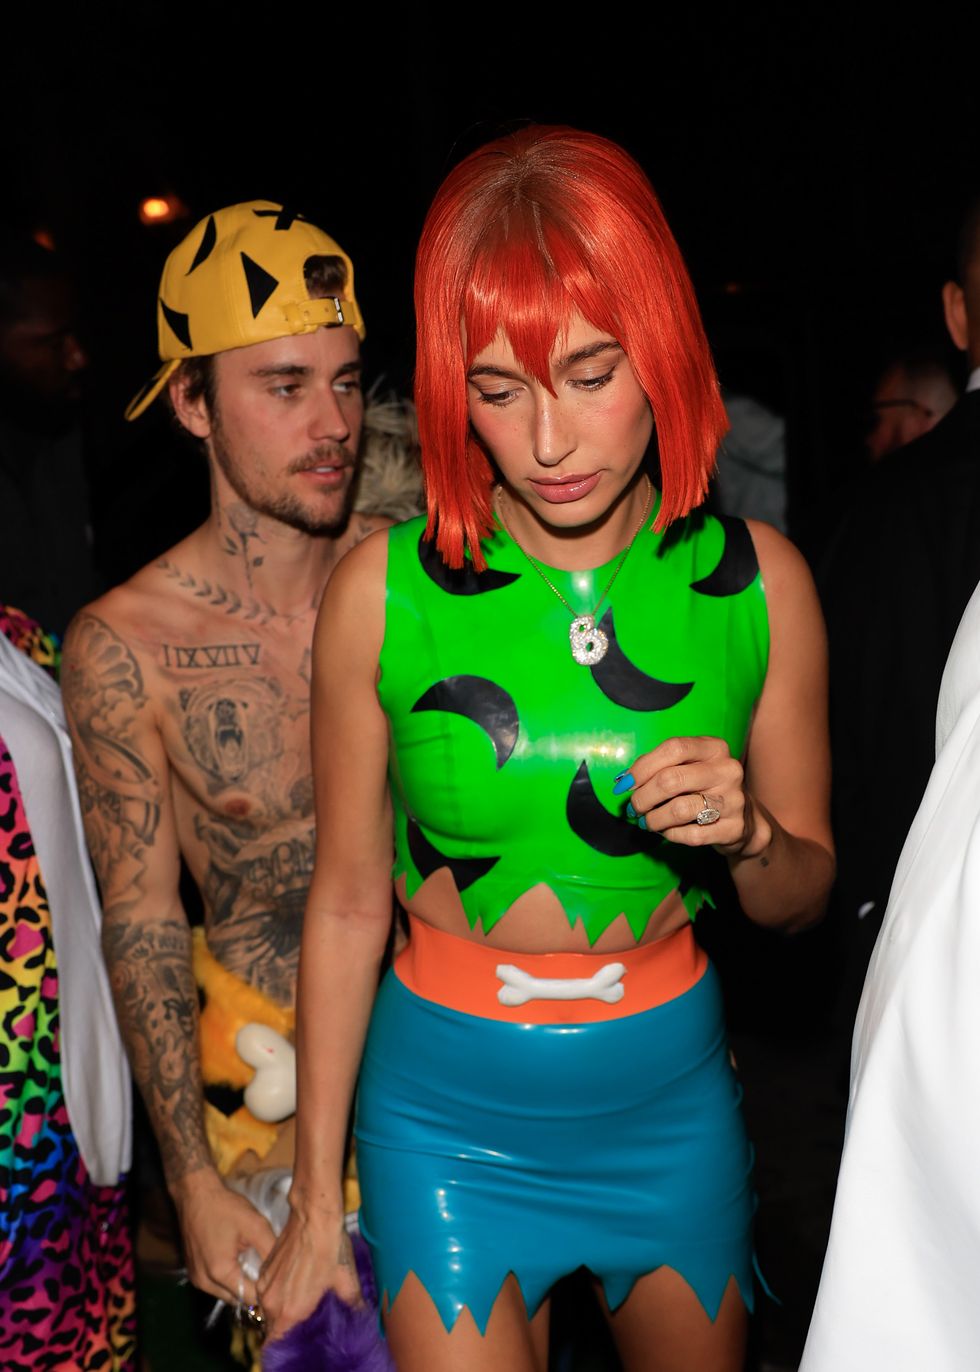 los angeles, ca october 28 justin bieber and hailey bieber are seen arriving to vas morgan and michael brauns halloween party on october 28, 2023 in los angeles, california photo by rachpootbauer griffingc images